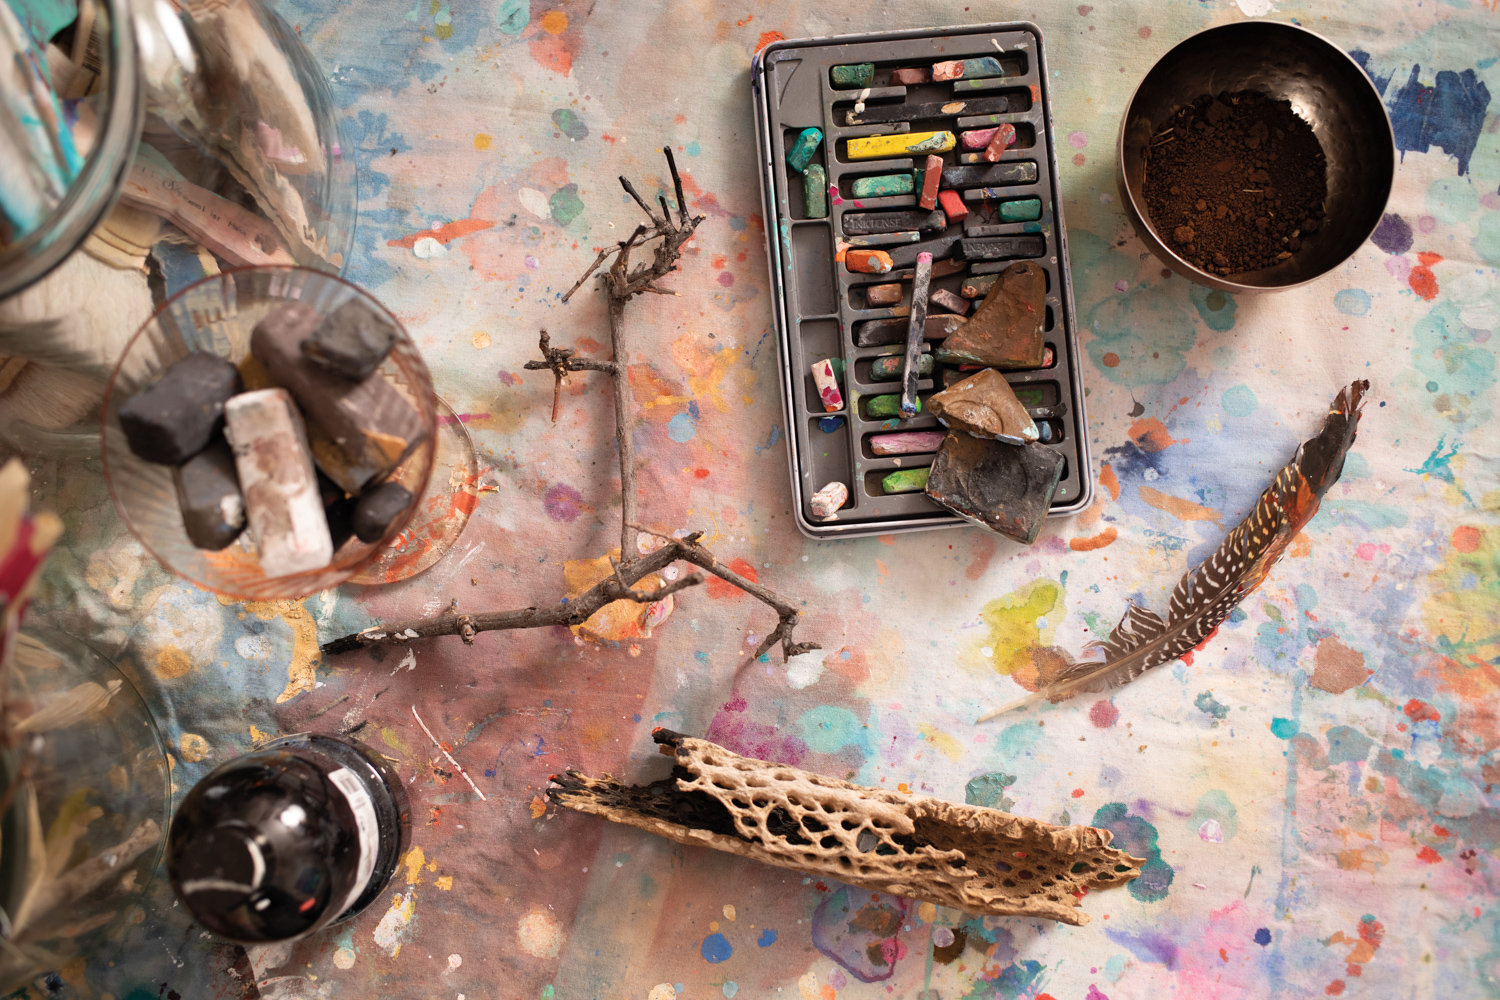 A collection of pastels, a bowl of dirt, driftwood and a feather sit on a paint-splattered table.